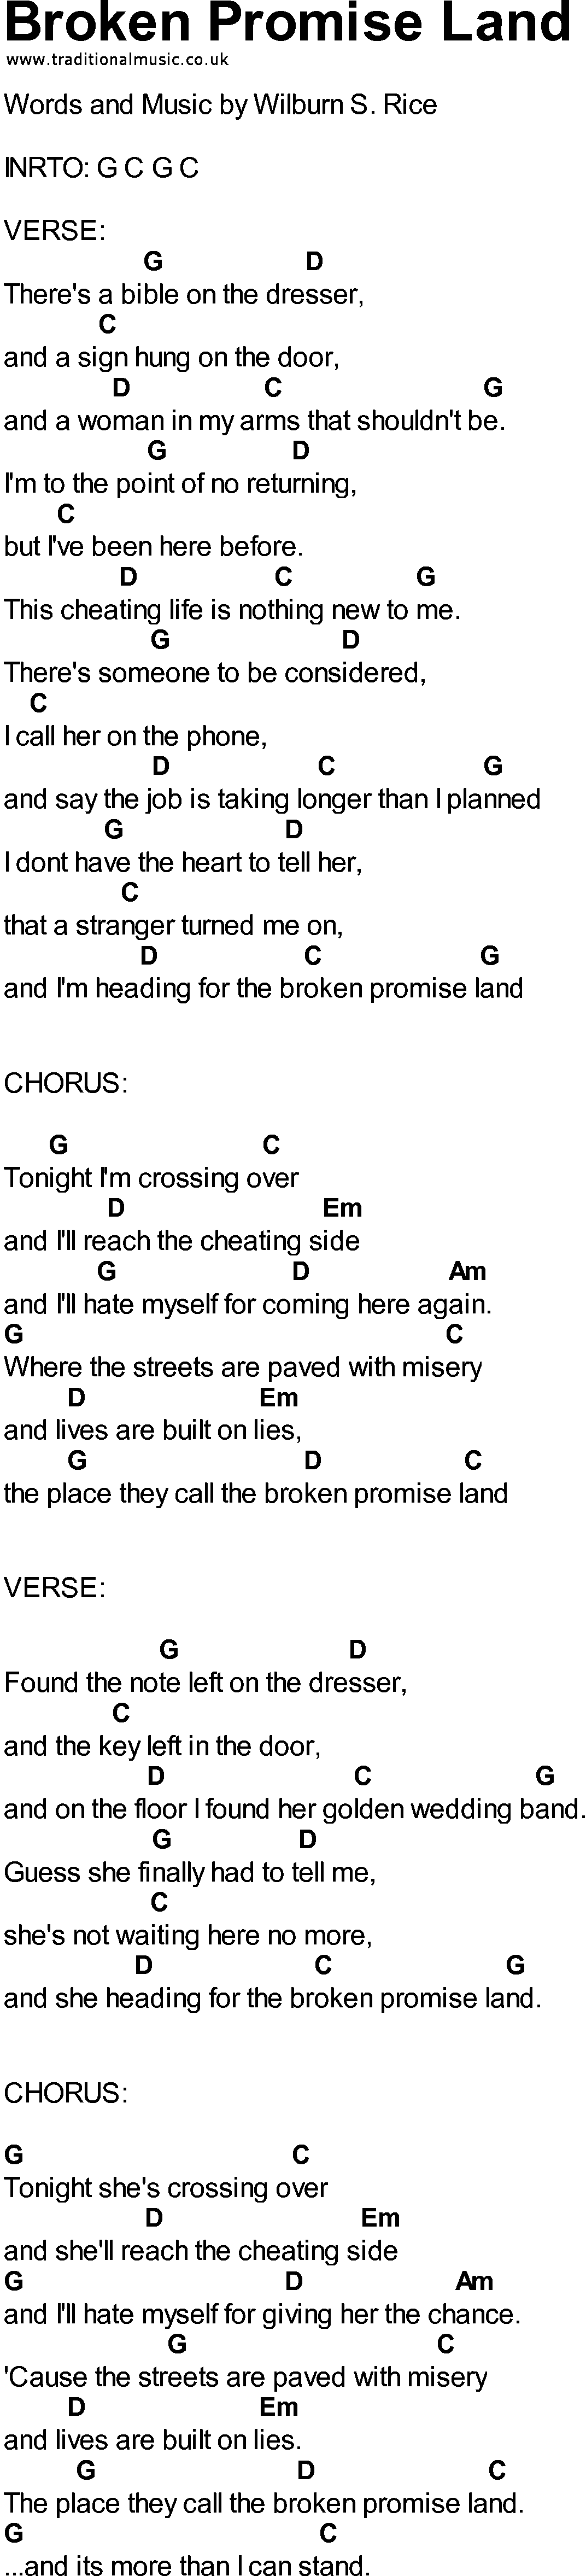 Bluegrass songs with chords - Broken Promise Land